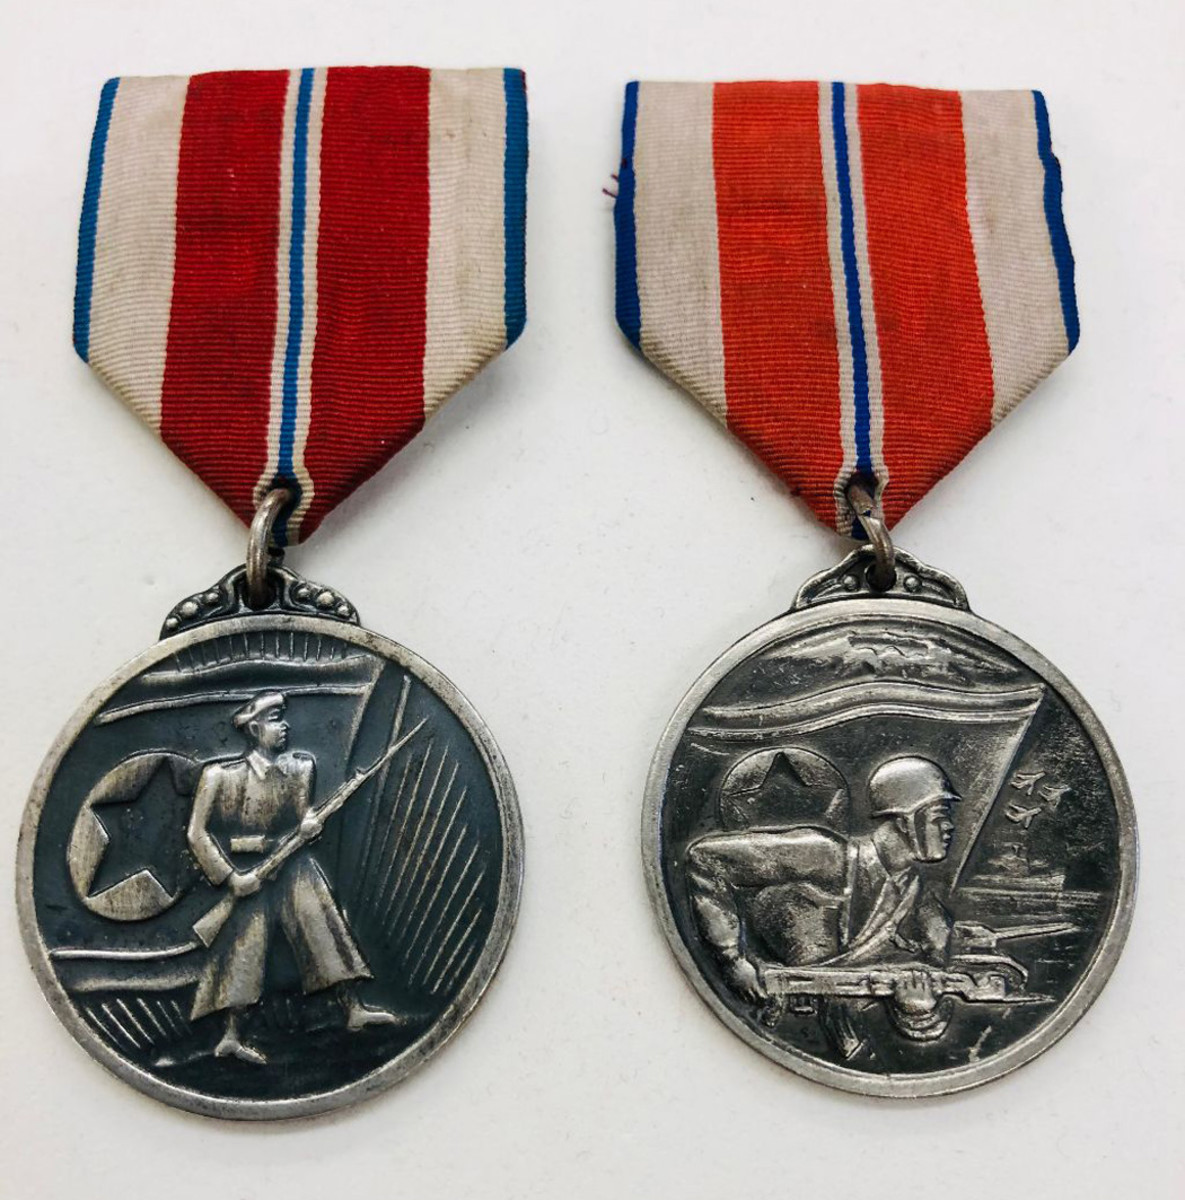 The first version of the Military Merit Medal shows a North Korean soldier wearing an overcoat and carrying a rifle with a large North Korean Flag behind him. The current version shows the upper body of a North Korean soldier carrying an AK-47 rifle. A partial North Korean Flag with a ship and two aircraft are found to the right.